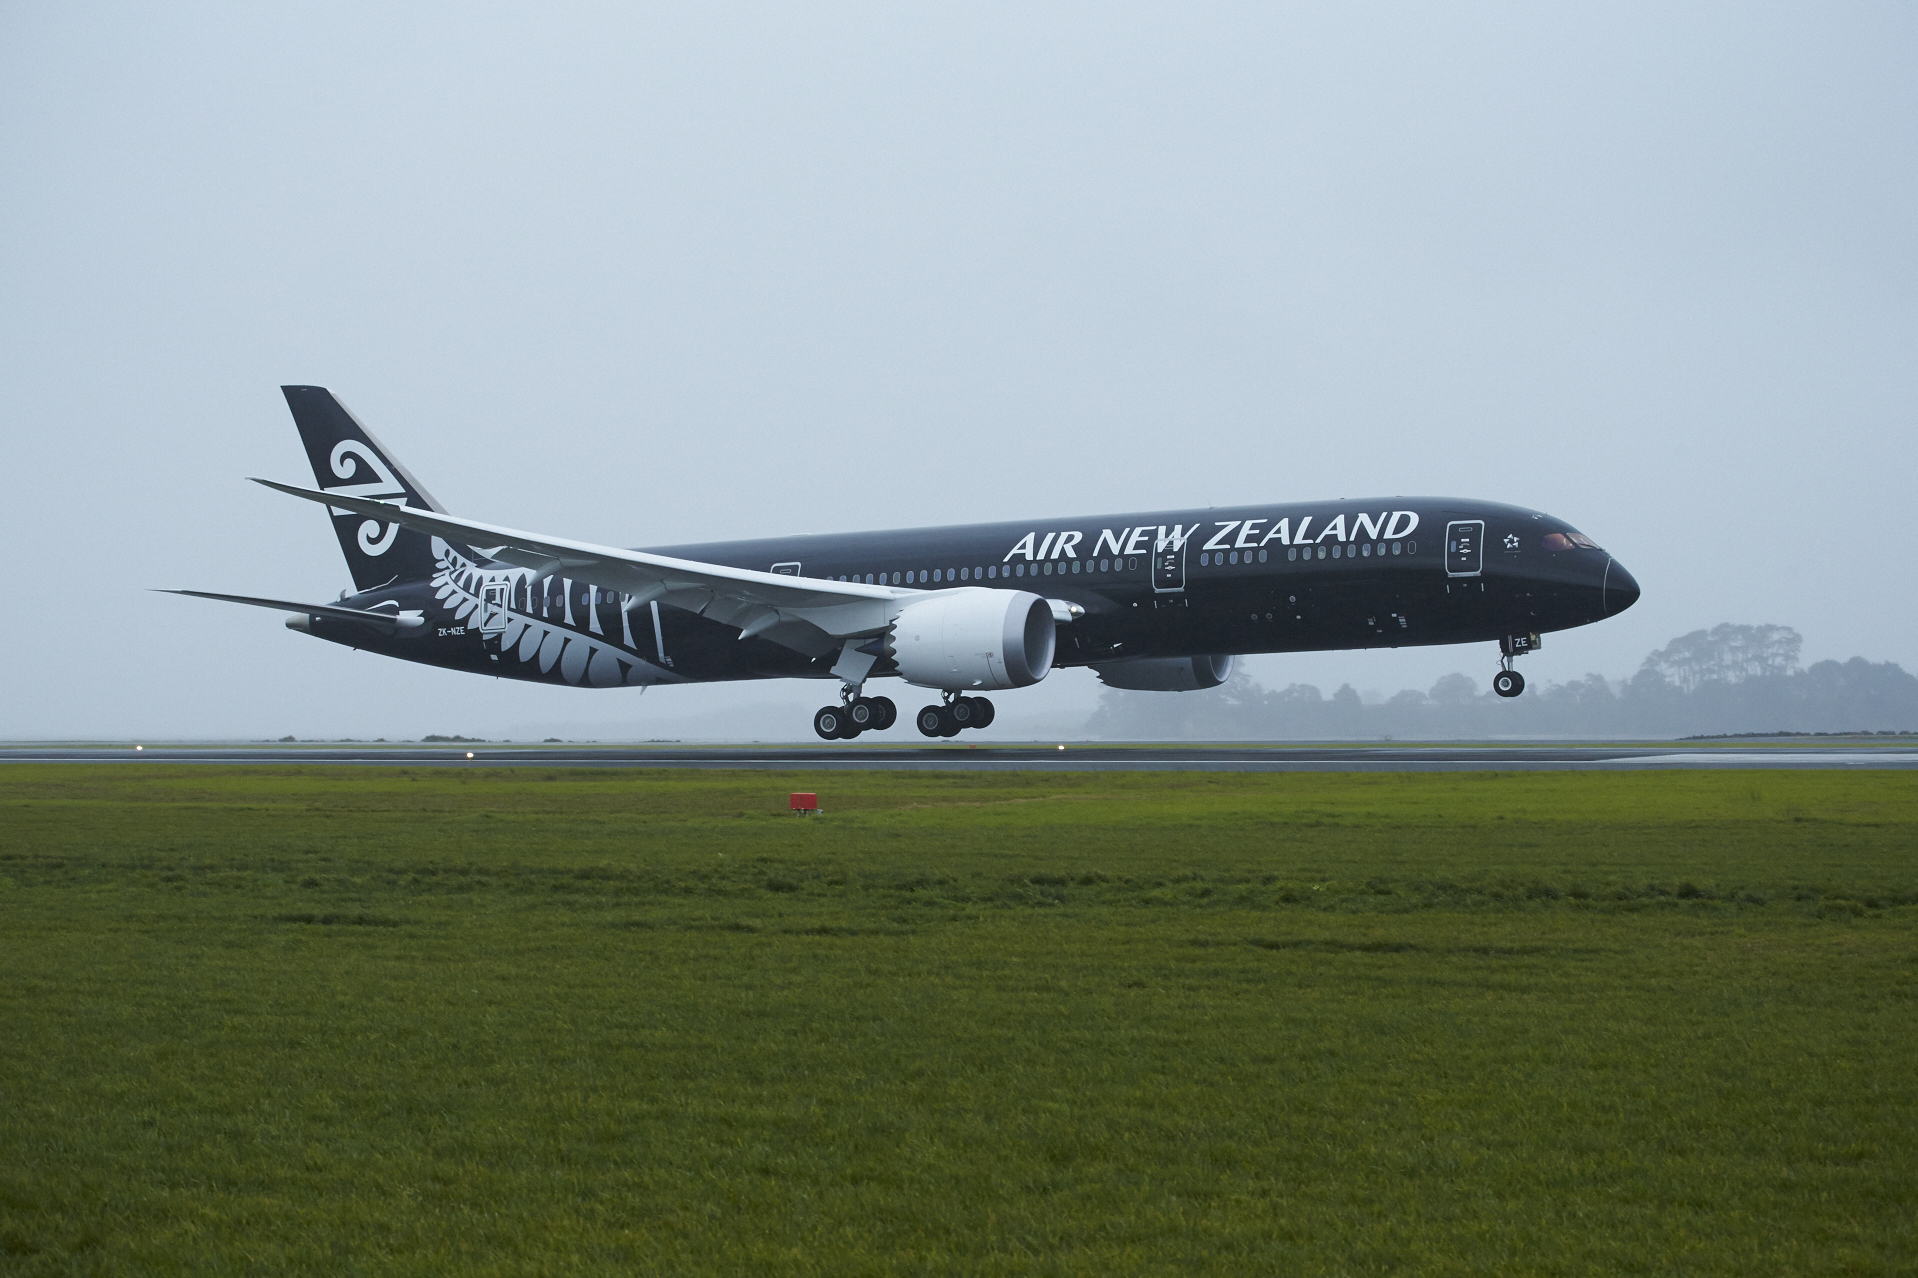 AerCap delivers new Boeing 787-9 Dreamliner to Air New Zealand